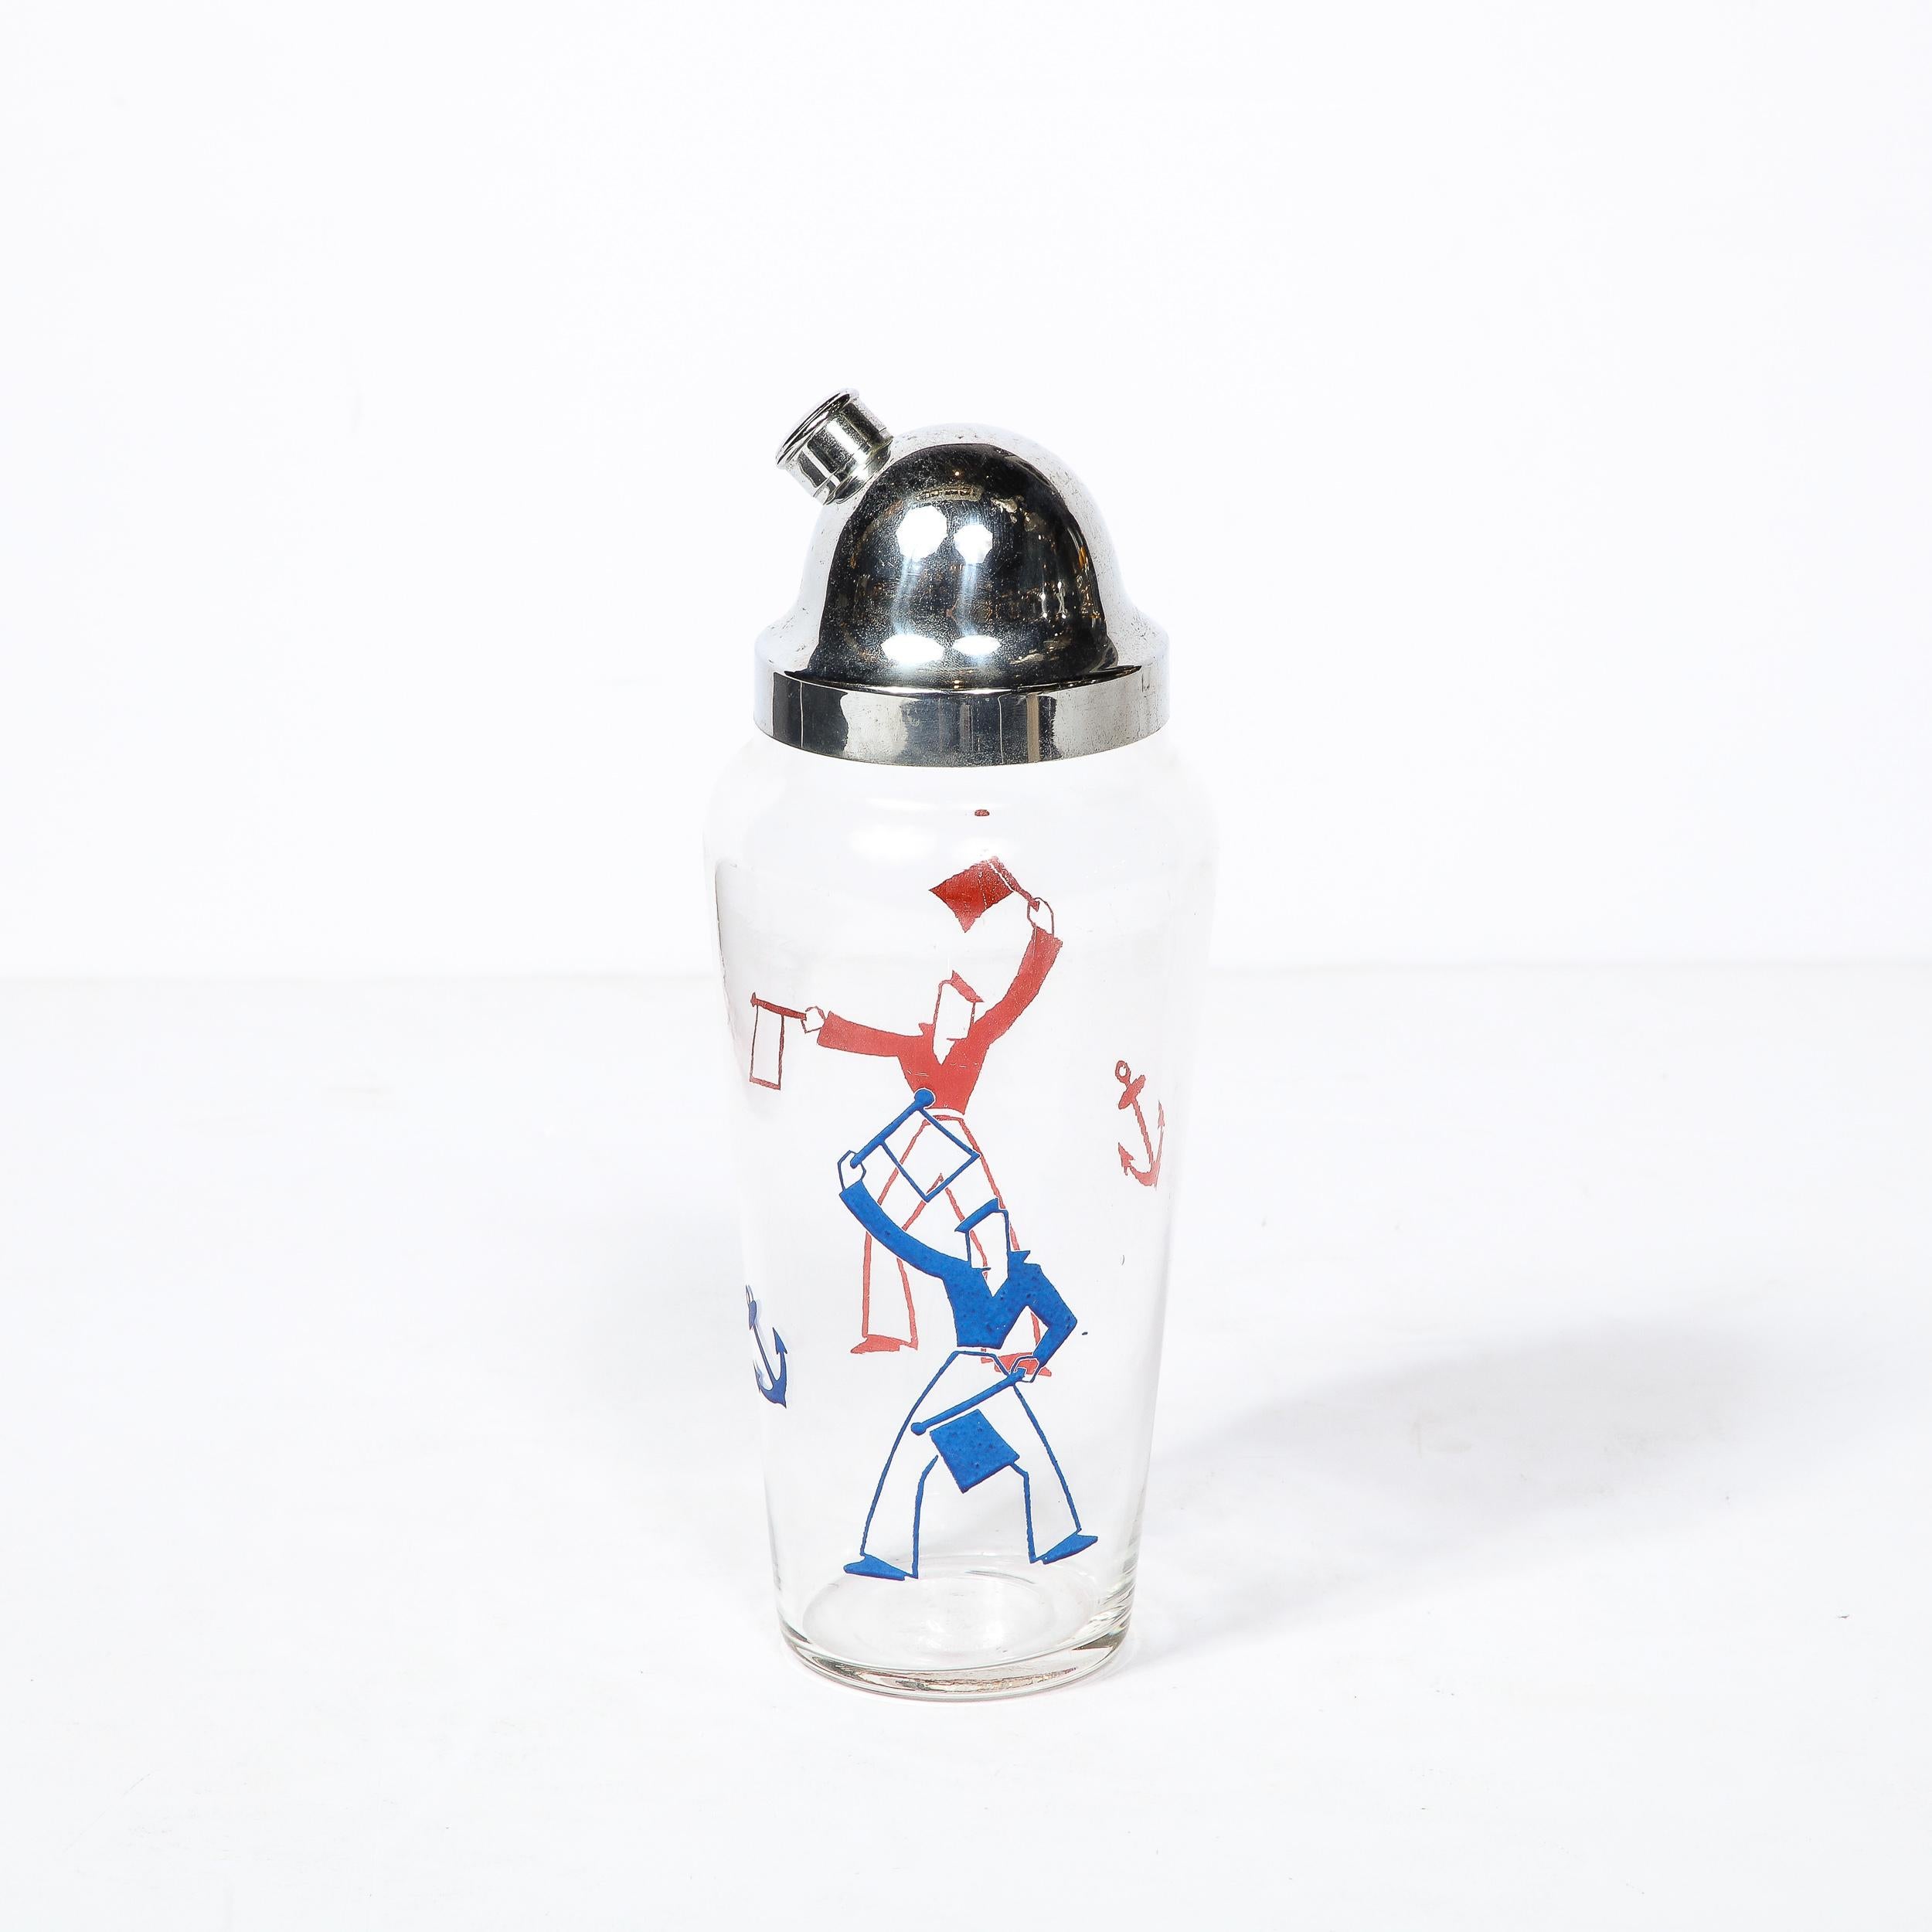 American Art Deco Whimsical Cocktail Shaker in Chrome with Sailors in Red and Blue 